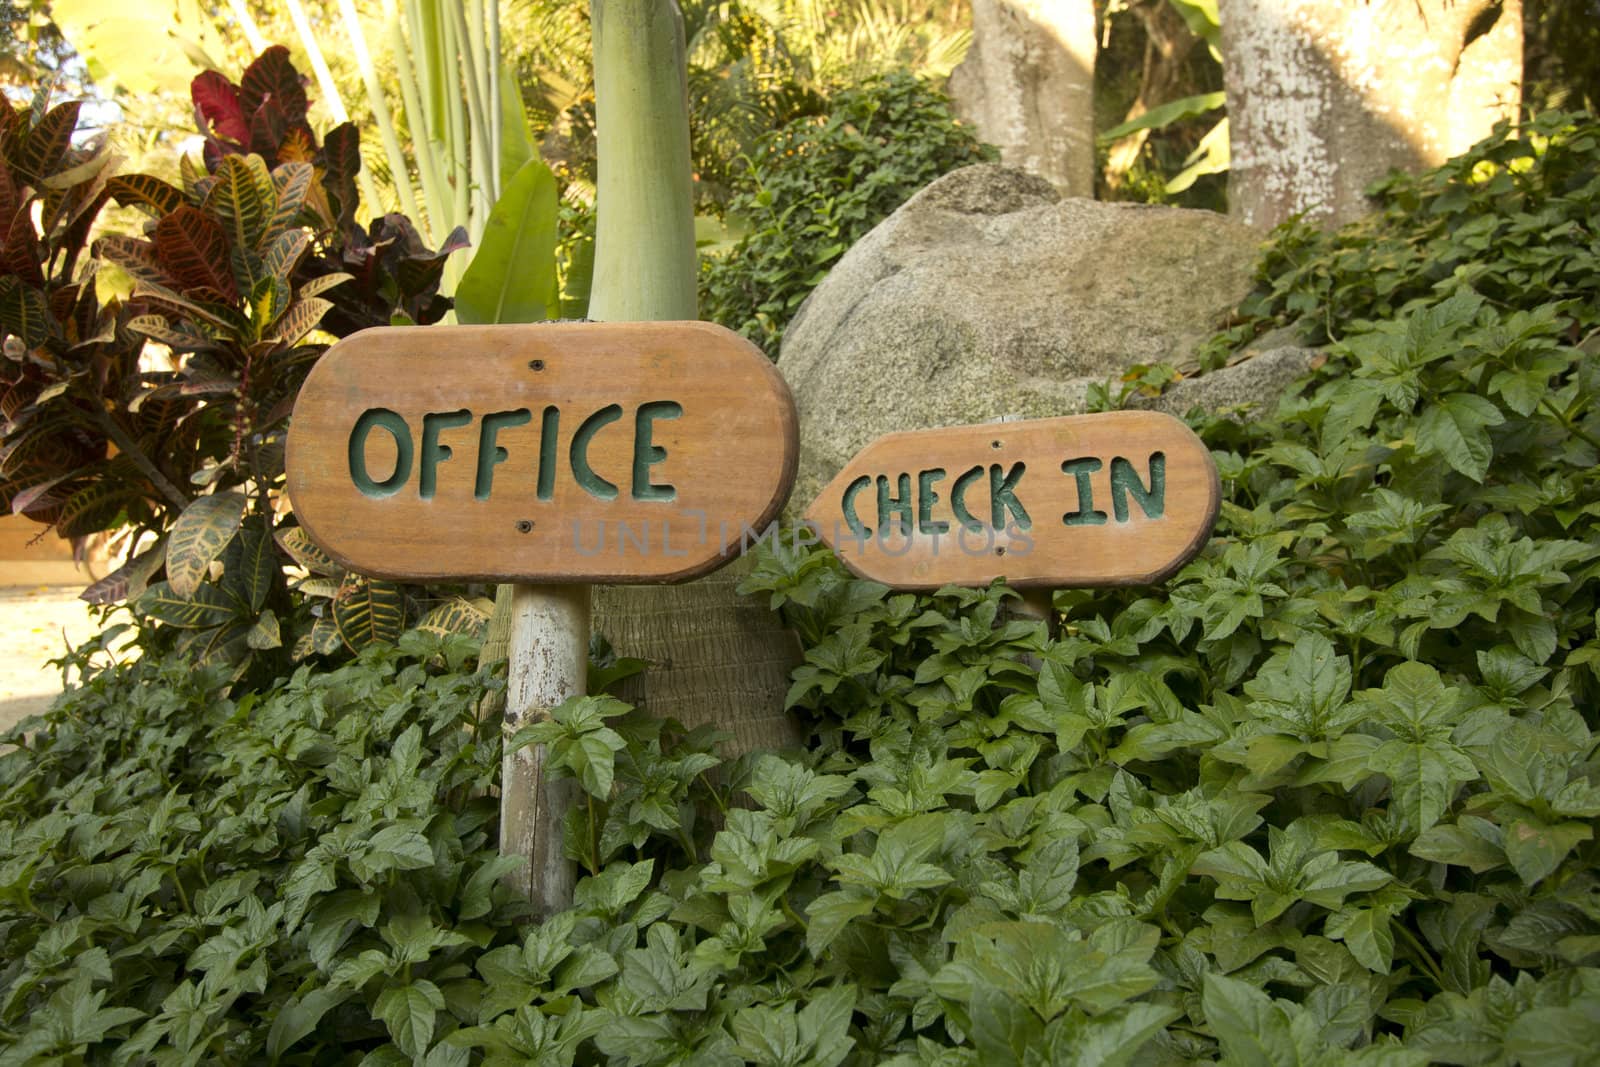 office check in sign in the middle of the forest.